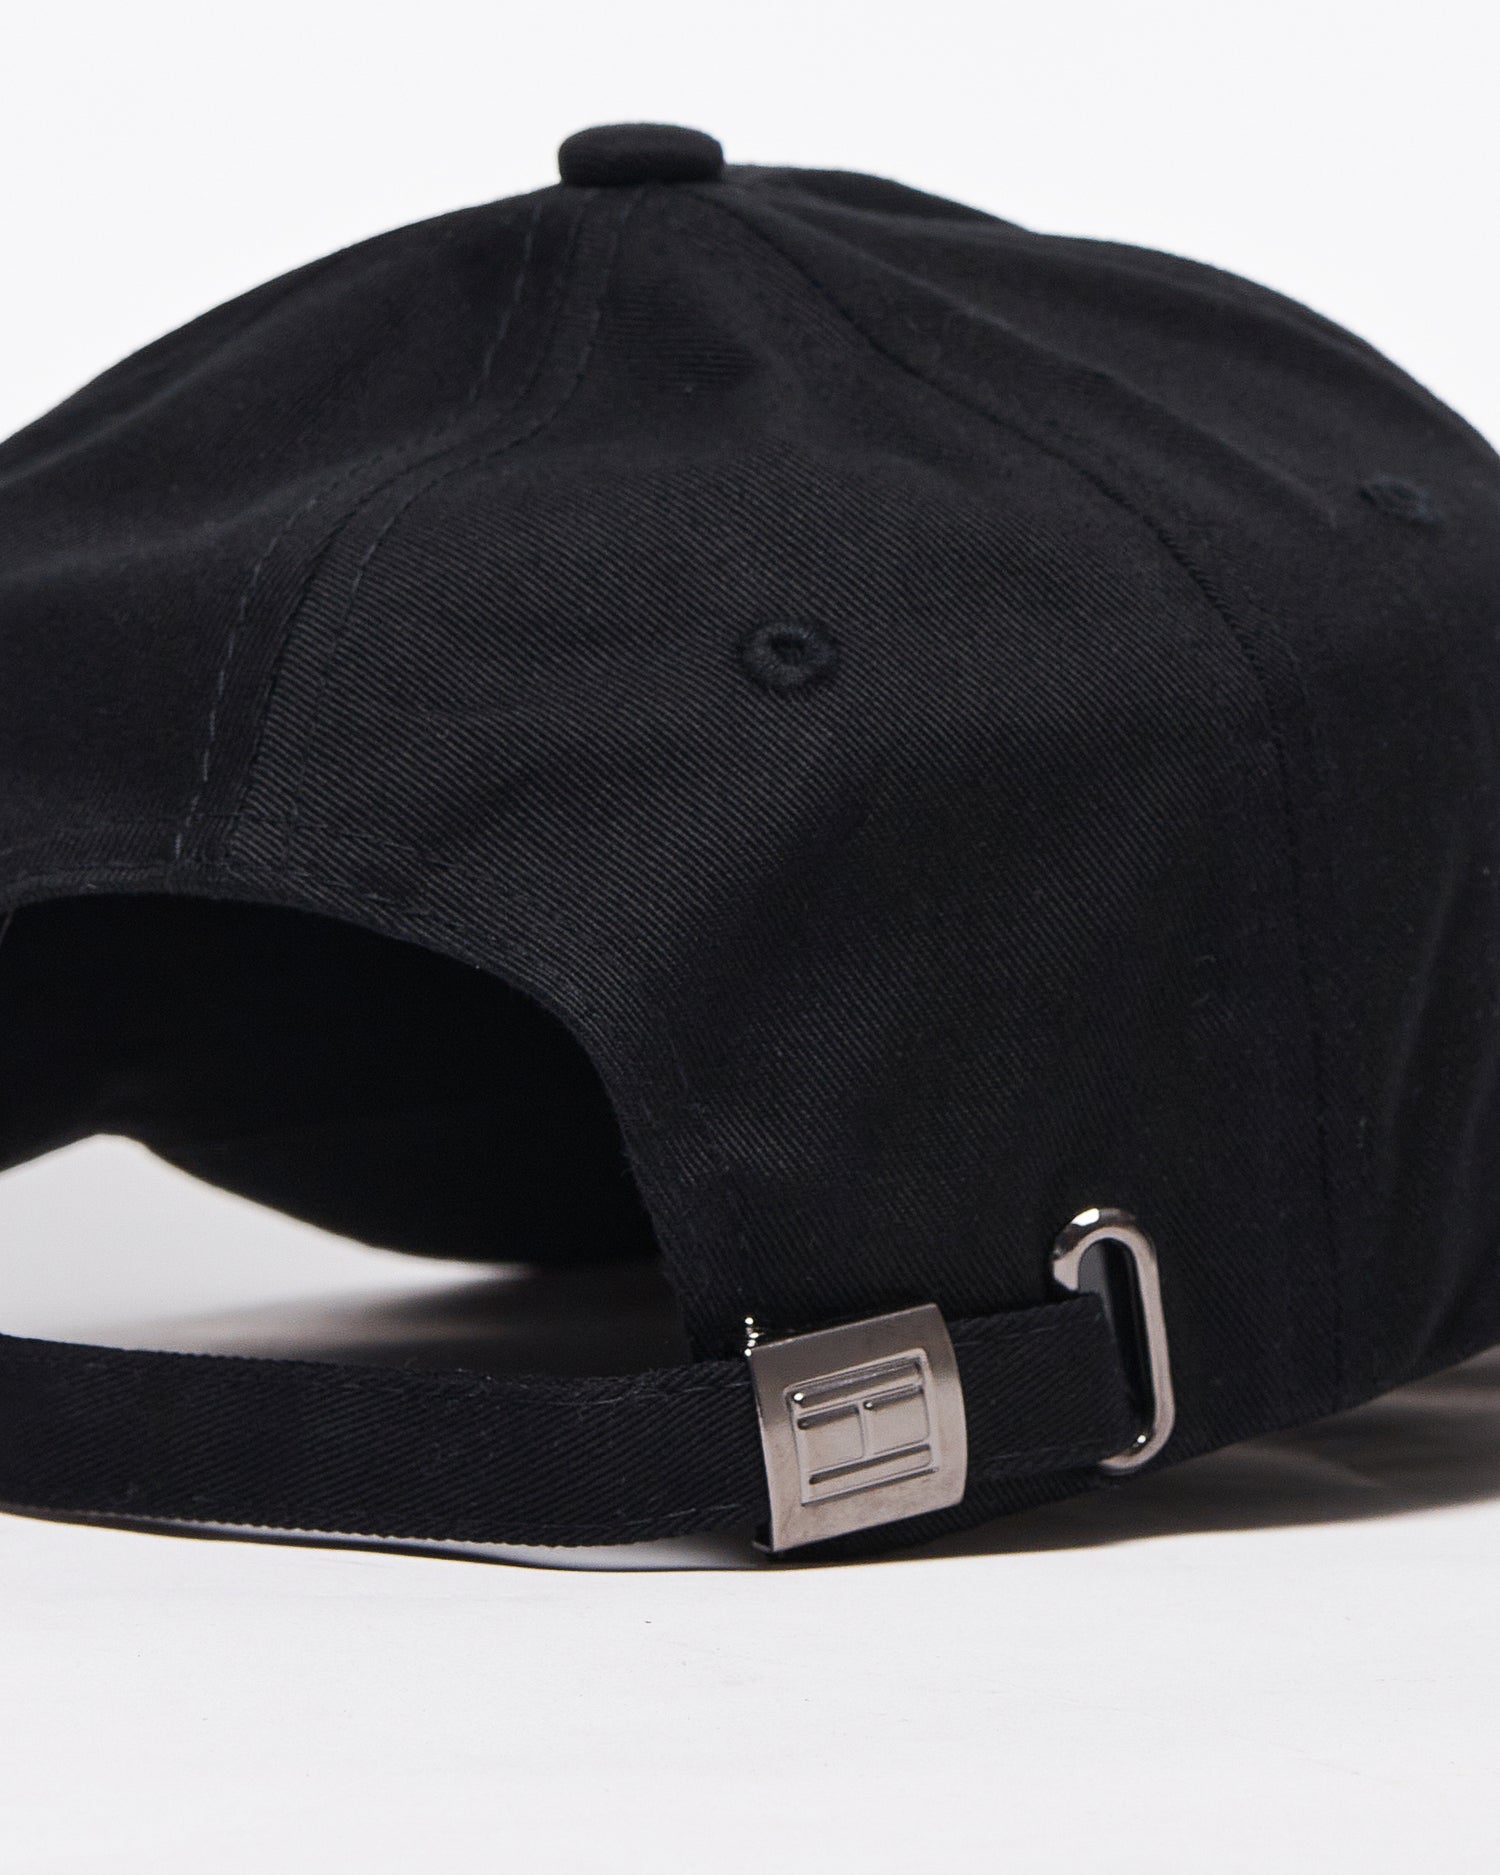 TH Logo Embroidered Black Cap 11.50